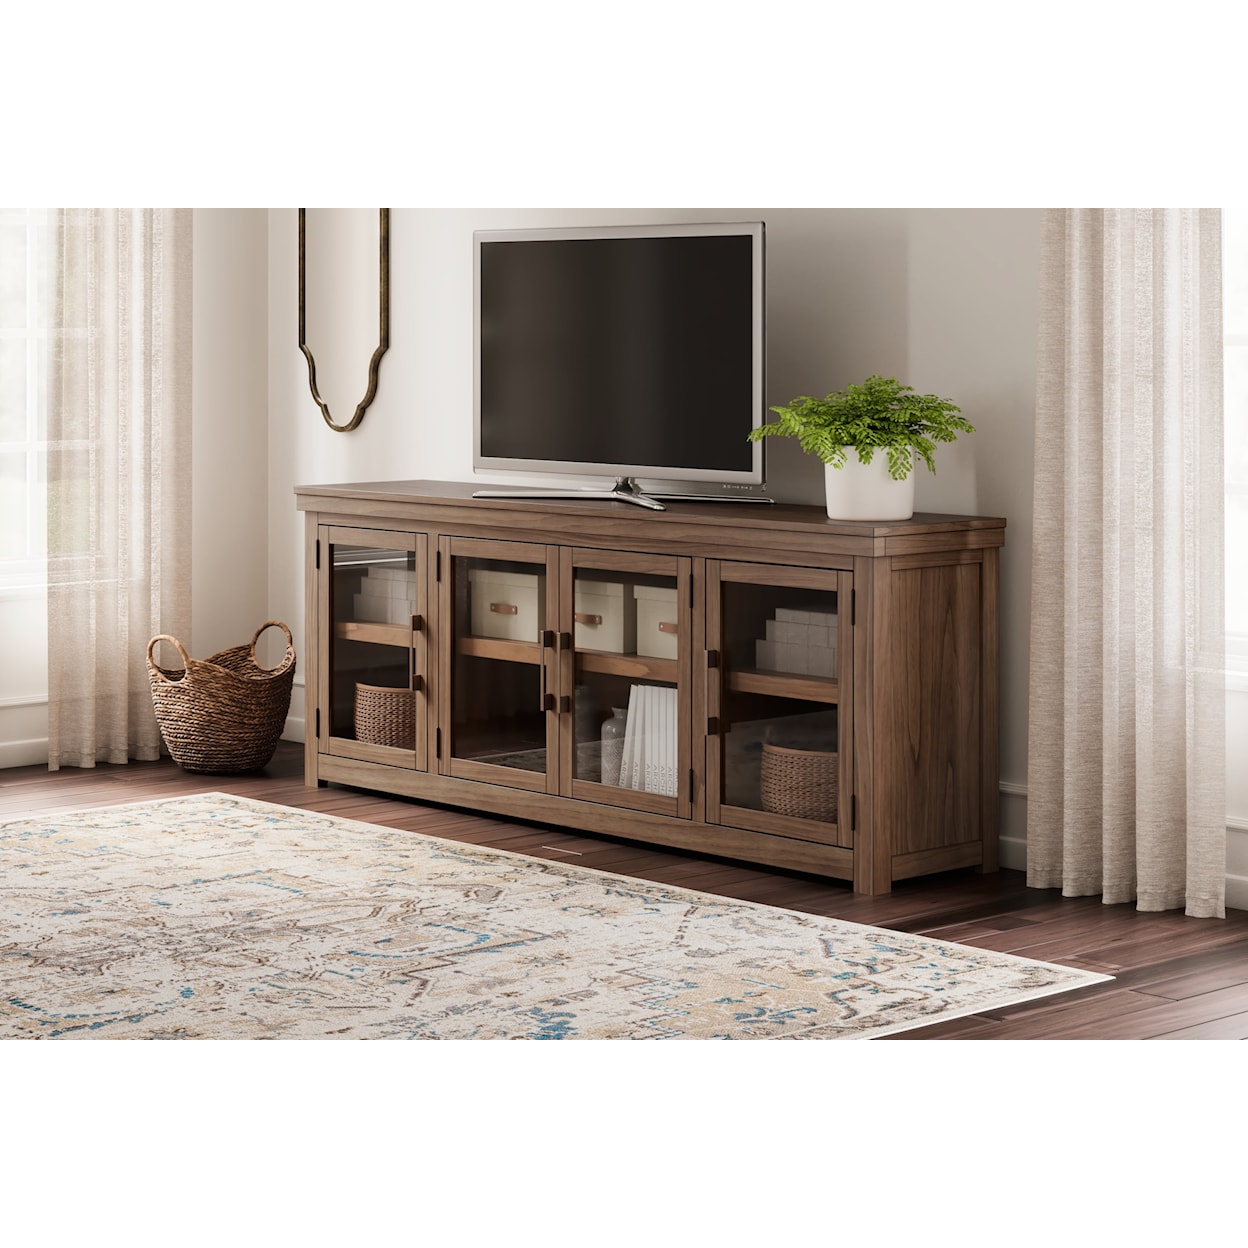 Benchcraft Boardernest Extra Large TV Stand